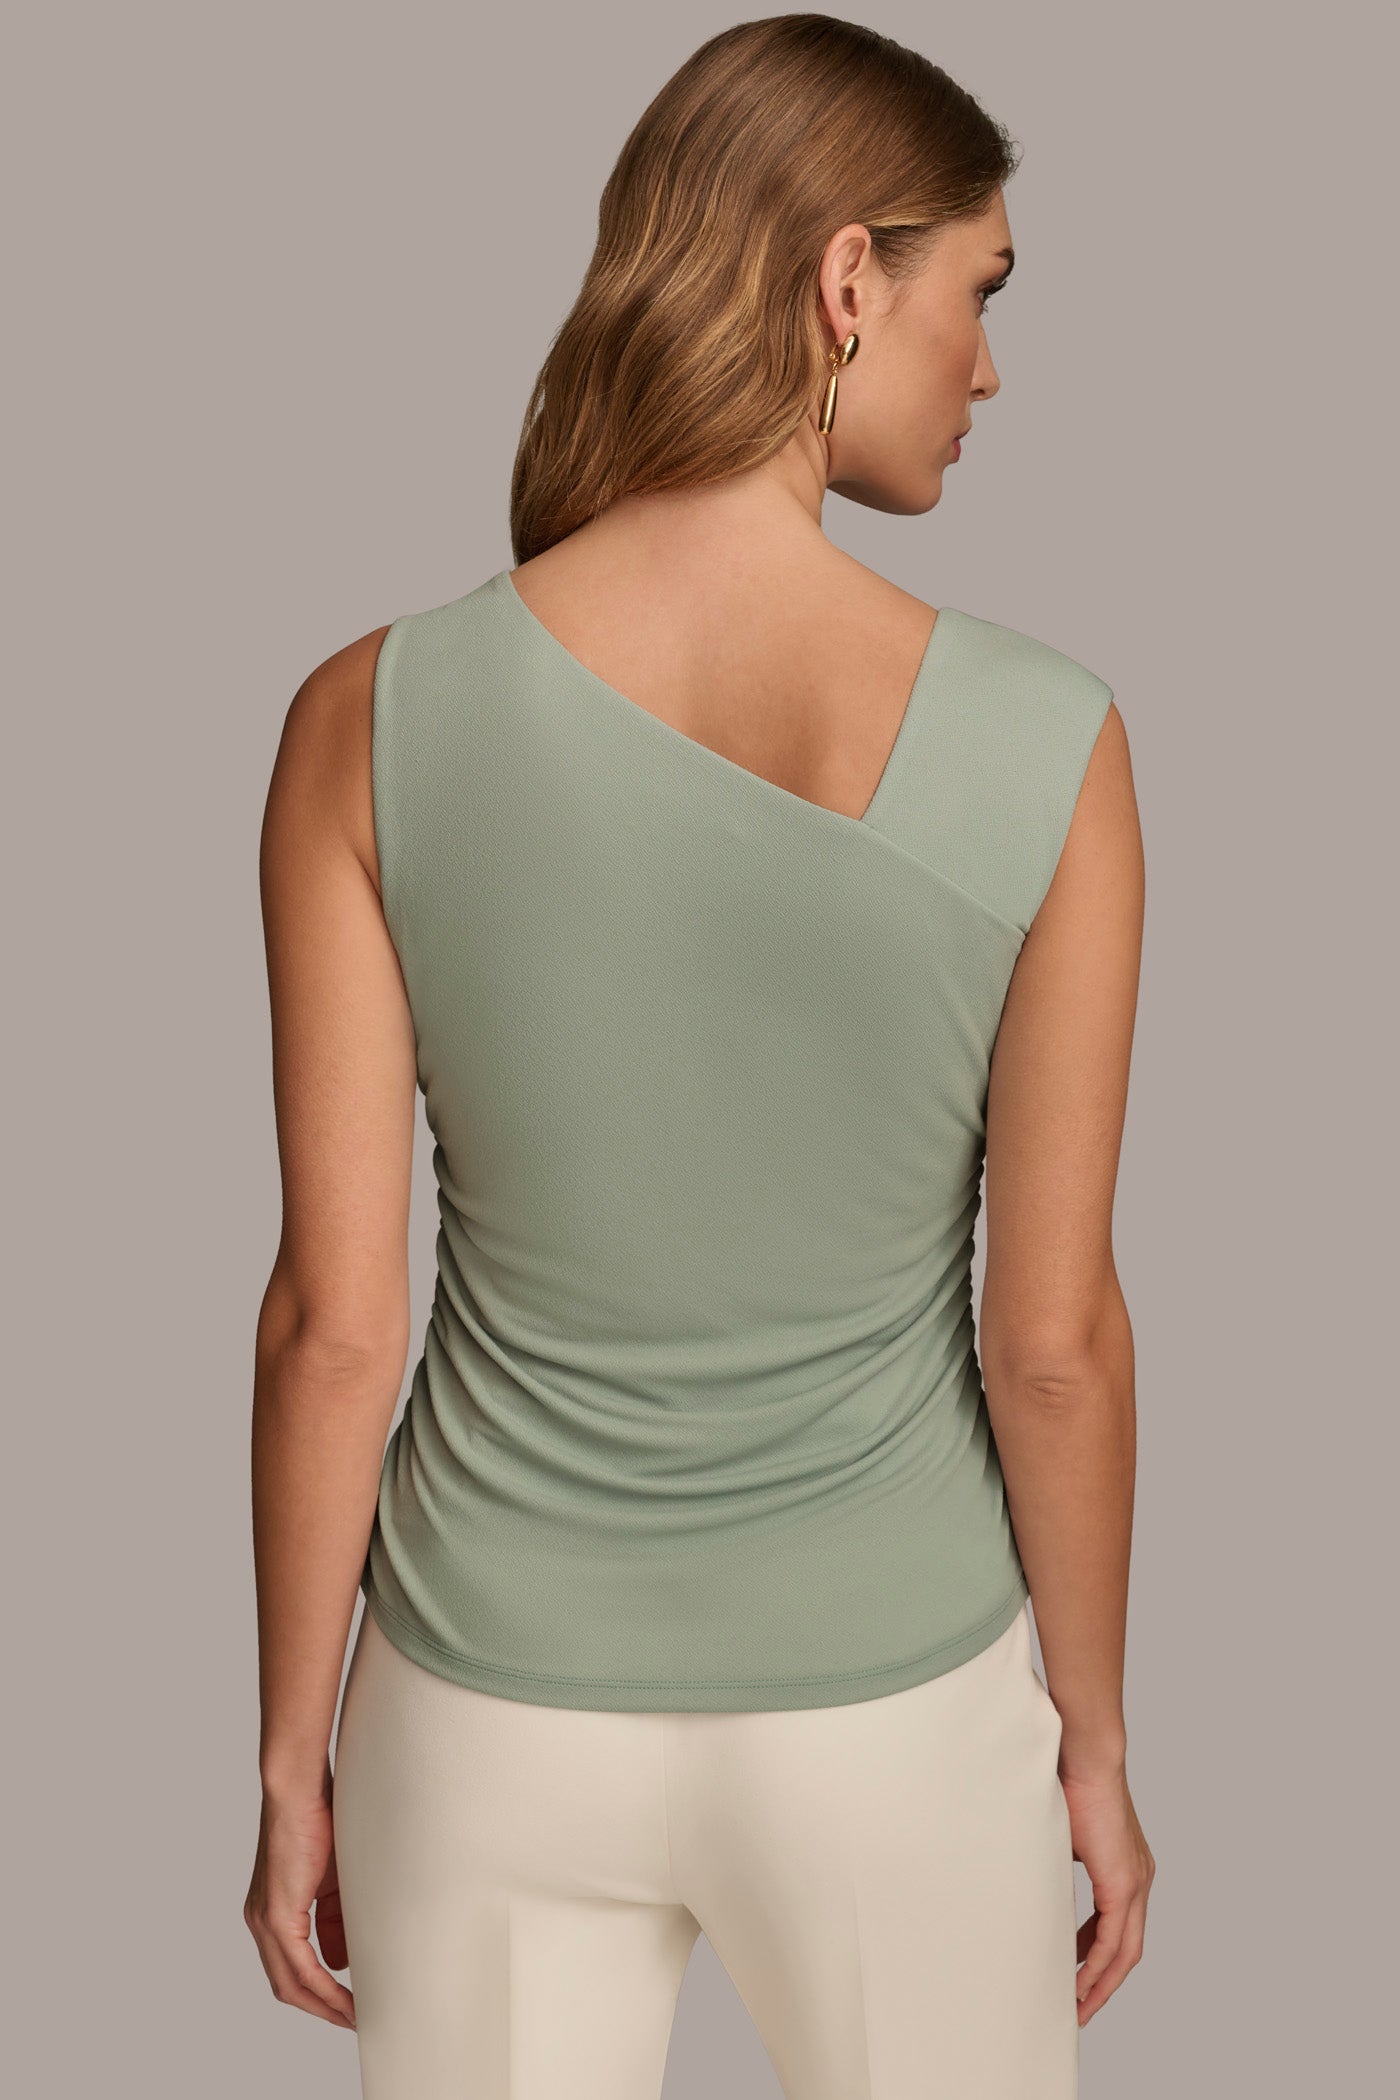 ASYMMETRICAL TOP WITH HARDWARE